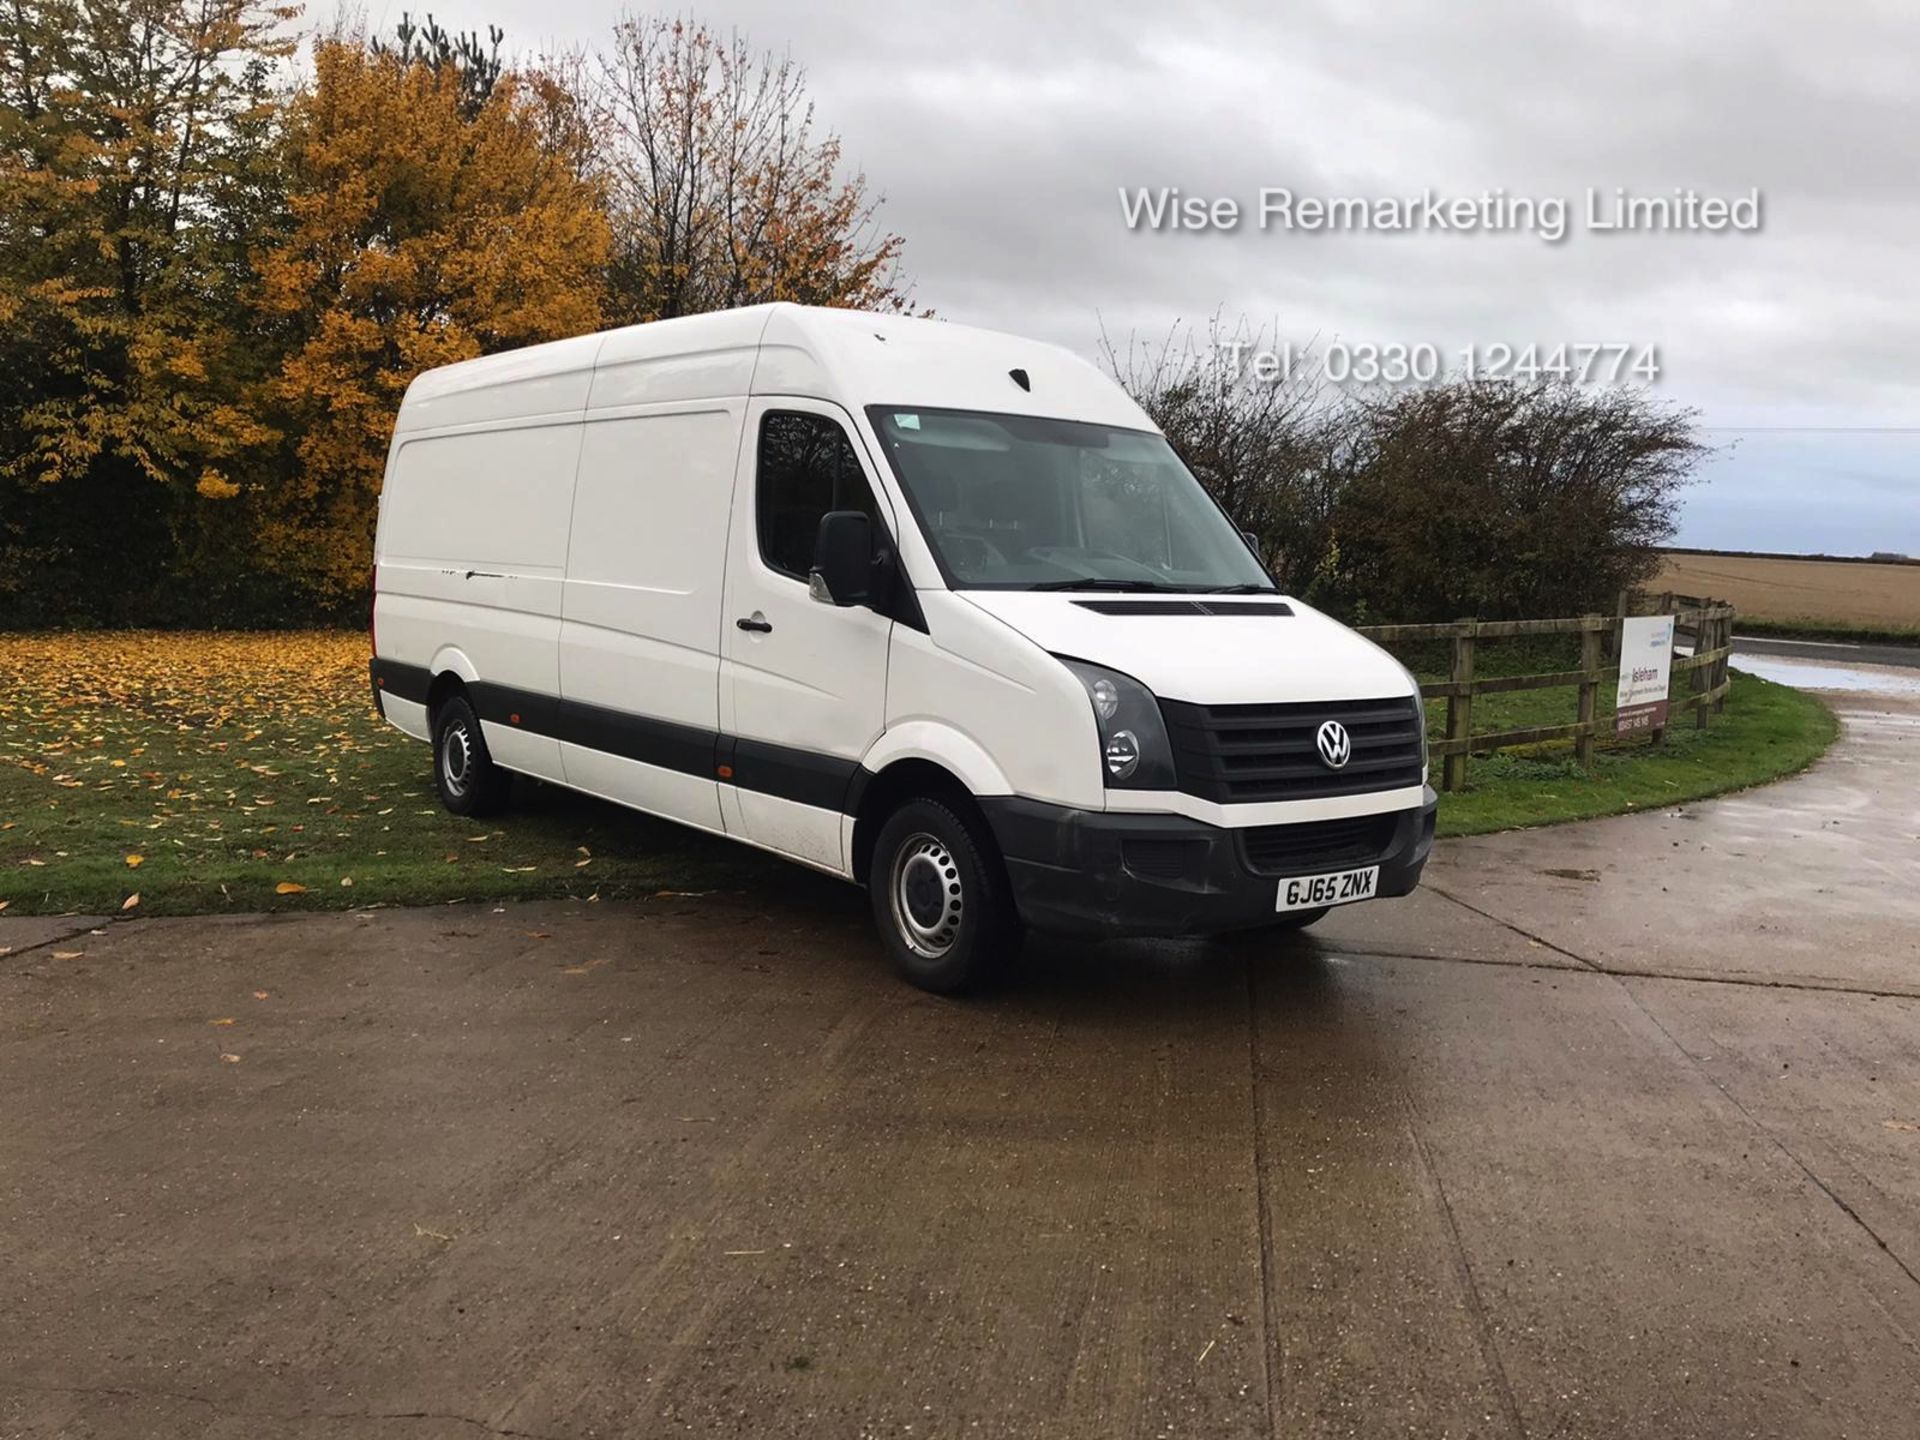 Volkswagen Crafter CR35 Startline 2.0l TDi - LWB - 2016 Model -1 Keeper From New - Service History - Image 3 of 15